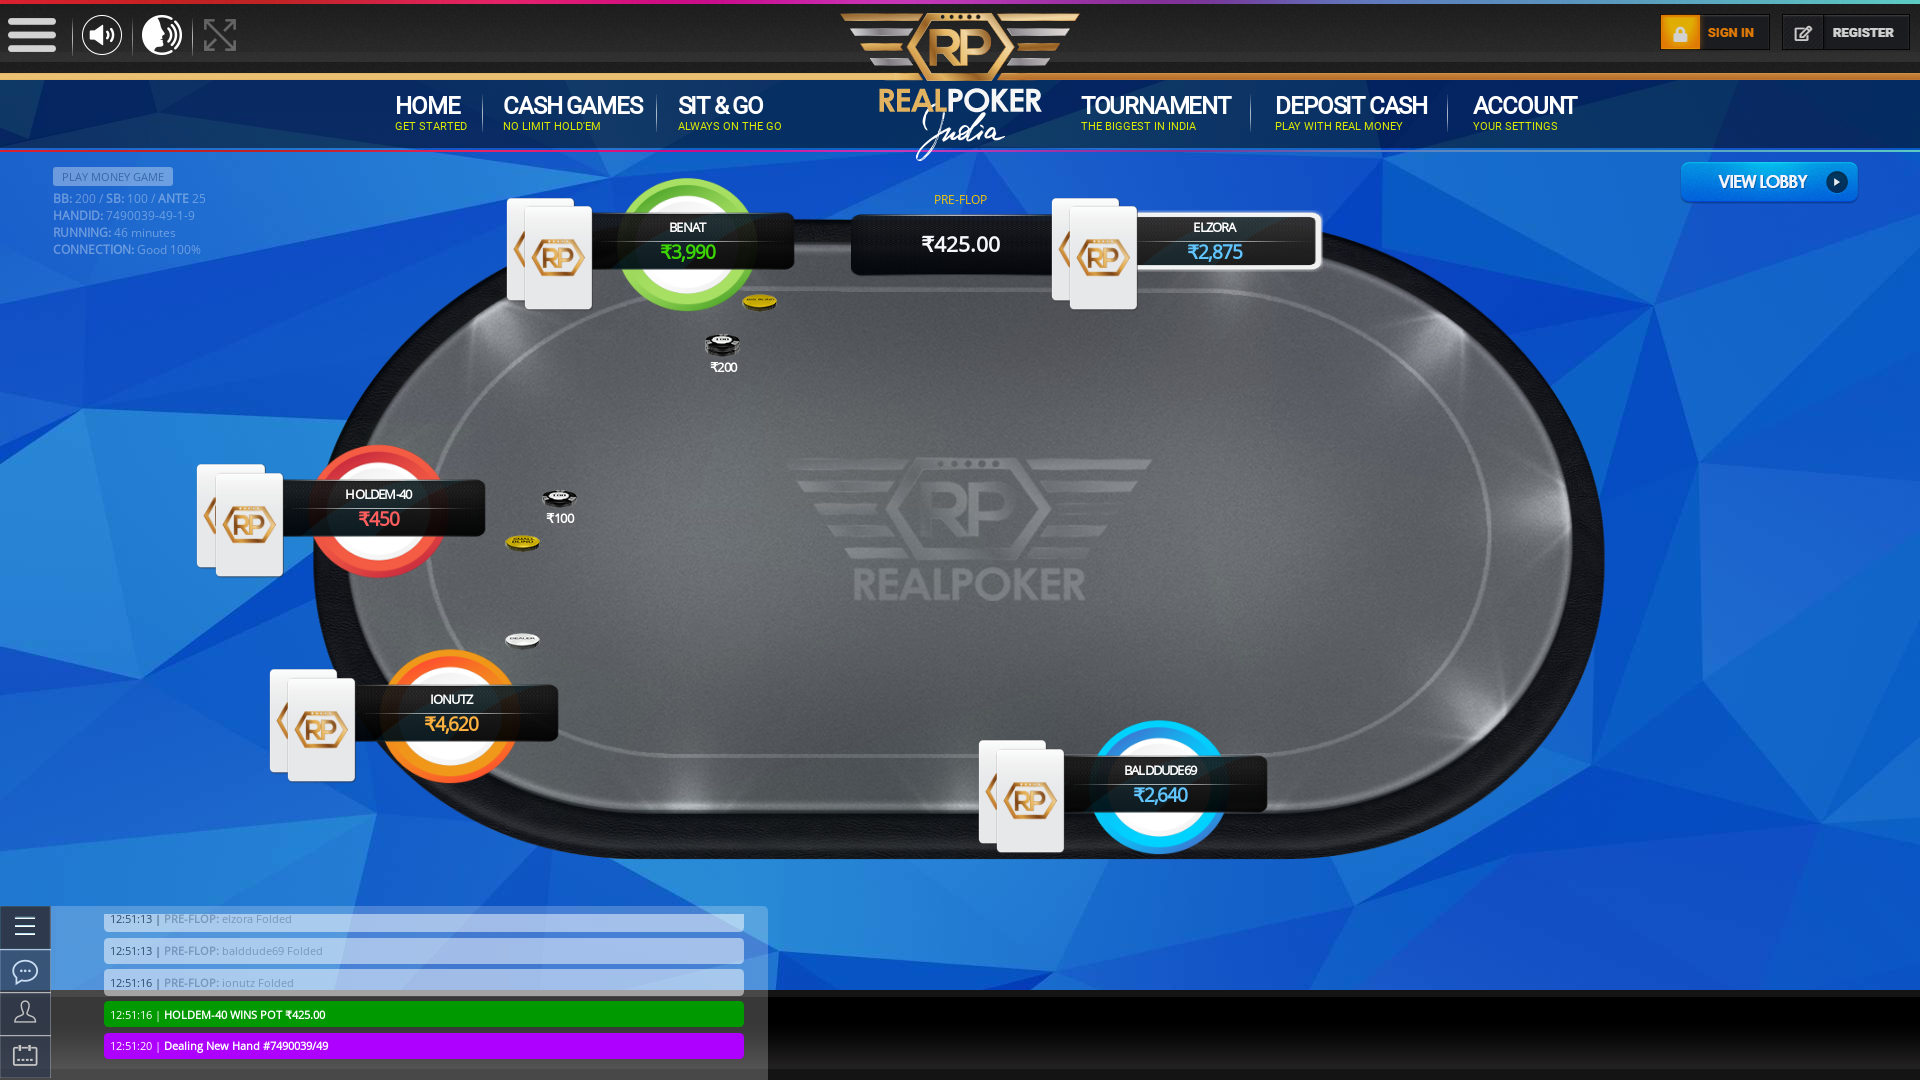 Real poker 10 player table in the 46th minute